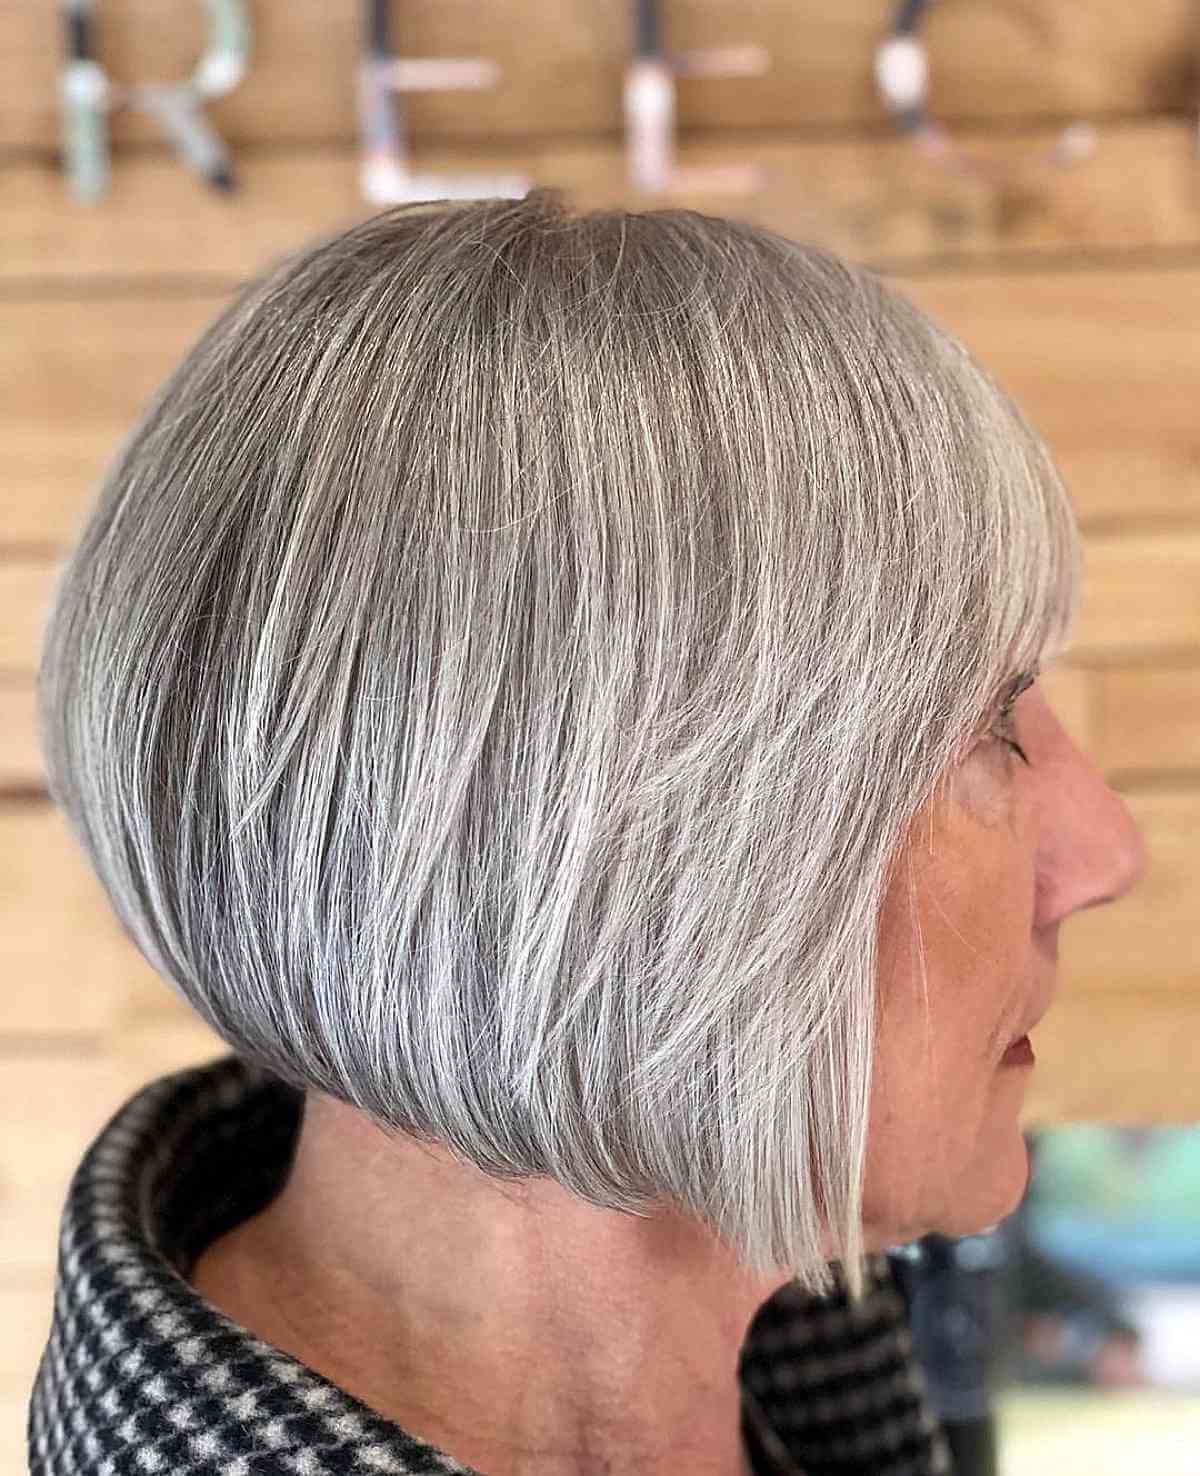 21 Flattering Short Hairstyles for Women In Their 60s with Grey Hair